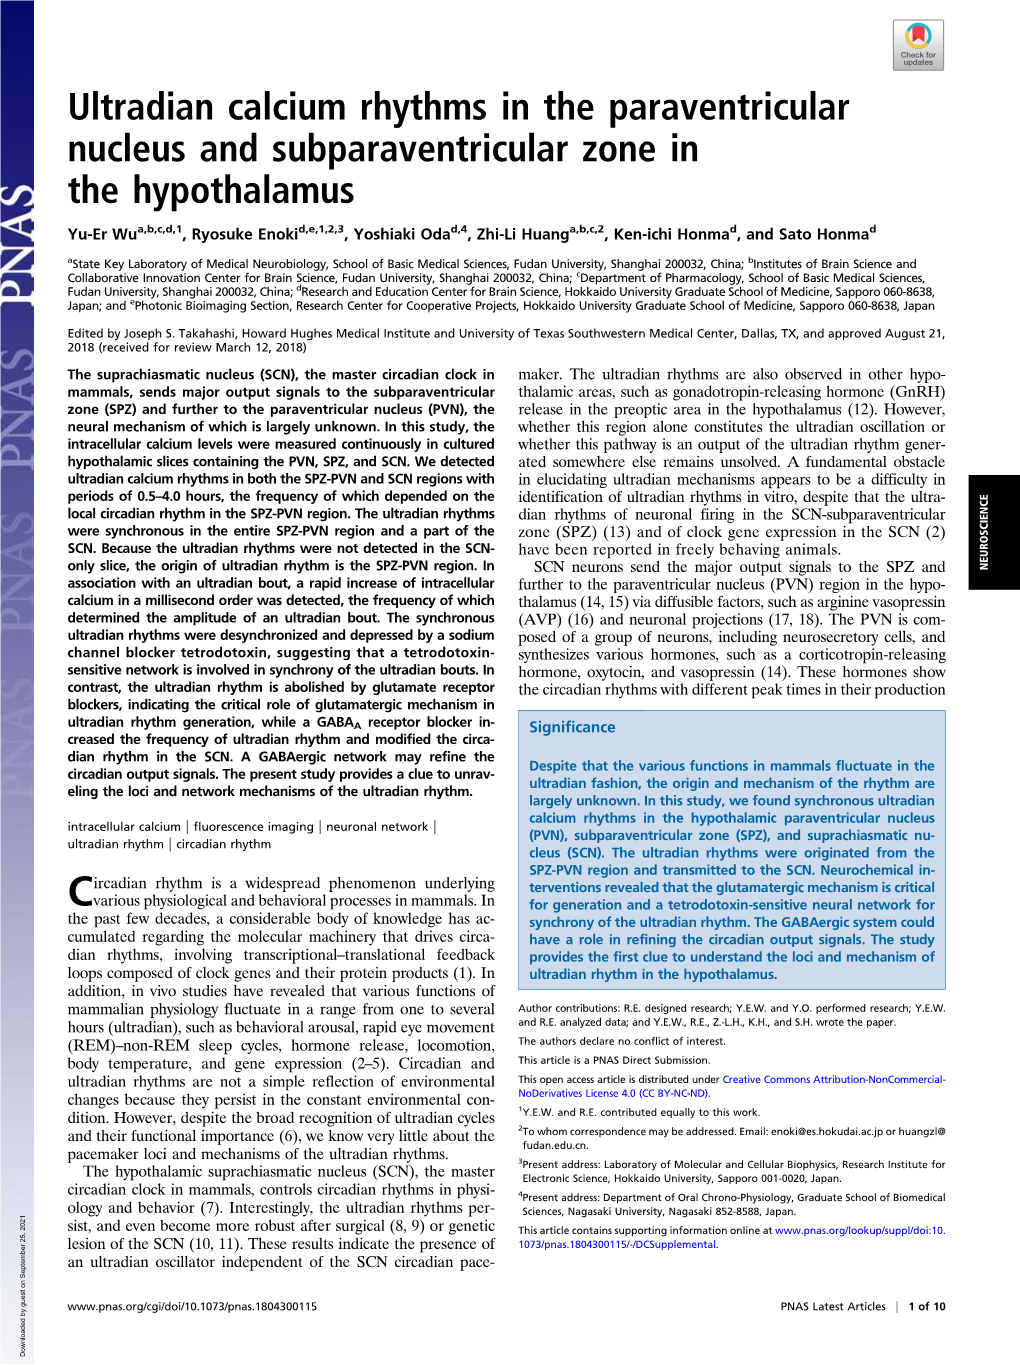 Ultradian Calcium Rhythms in the Paraventricular Nucleus and Subparaventricular Zone in the Hypothalamus